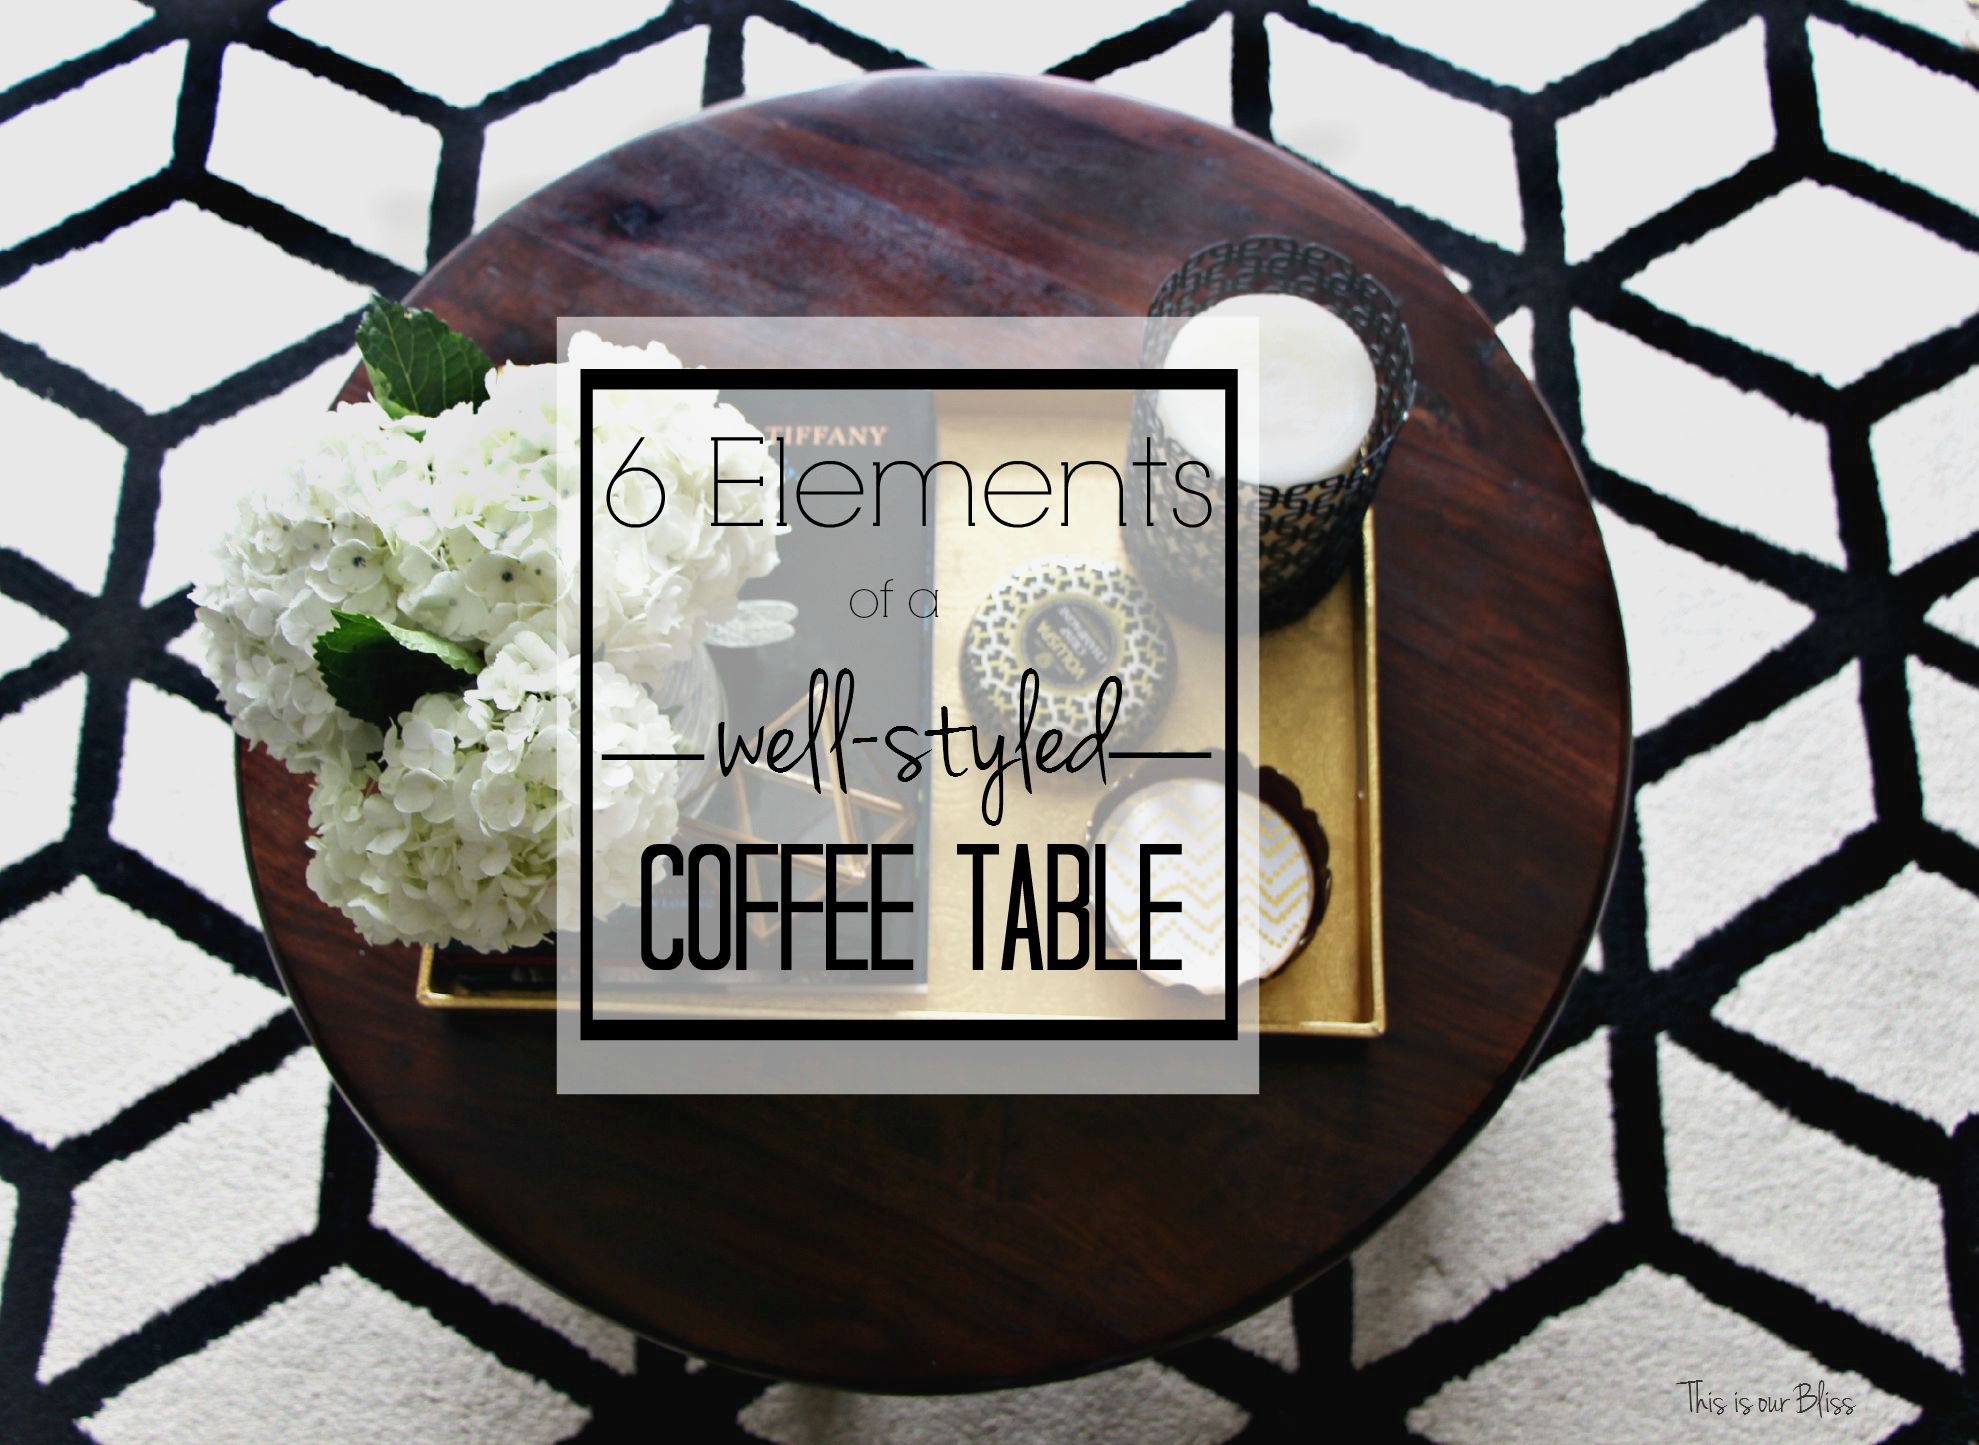 How to style a coffee table - coffee table styling - elements of a well-styled coffee table - Back to Basics 1 - This is our Bliss 1